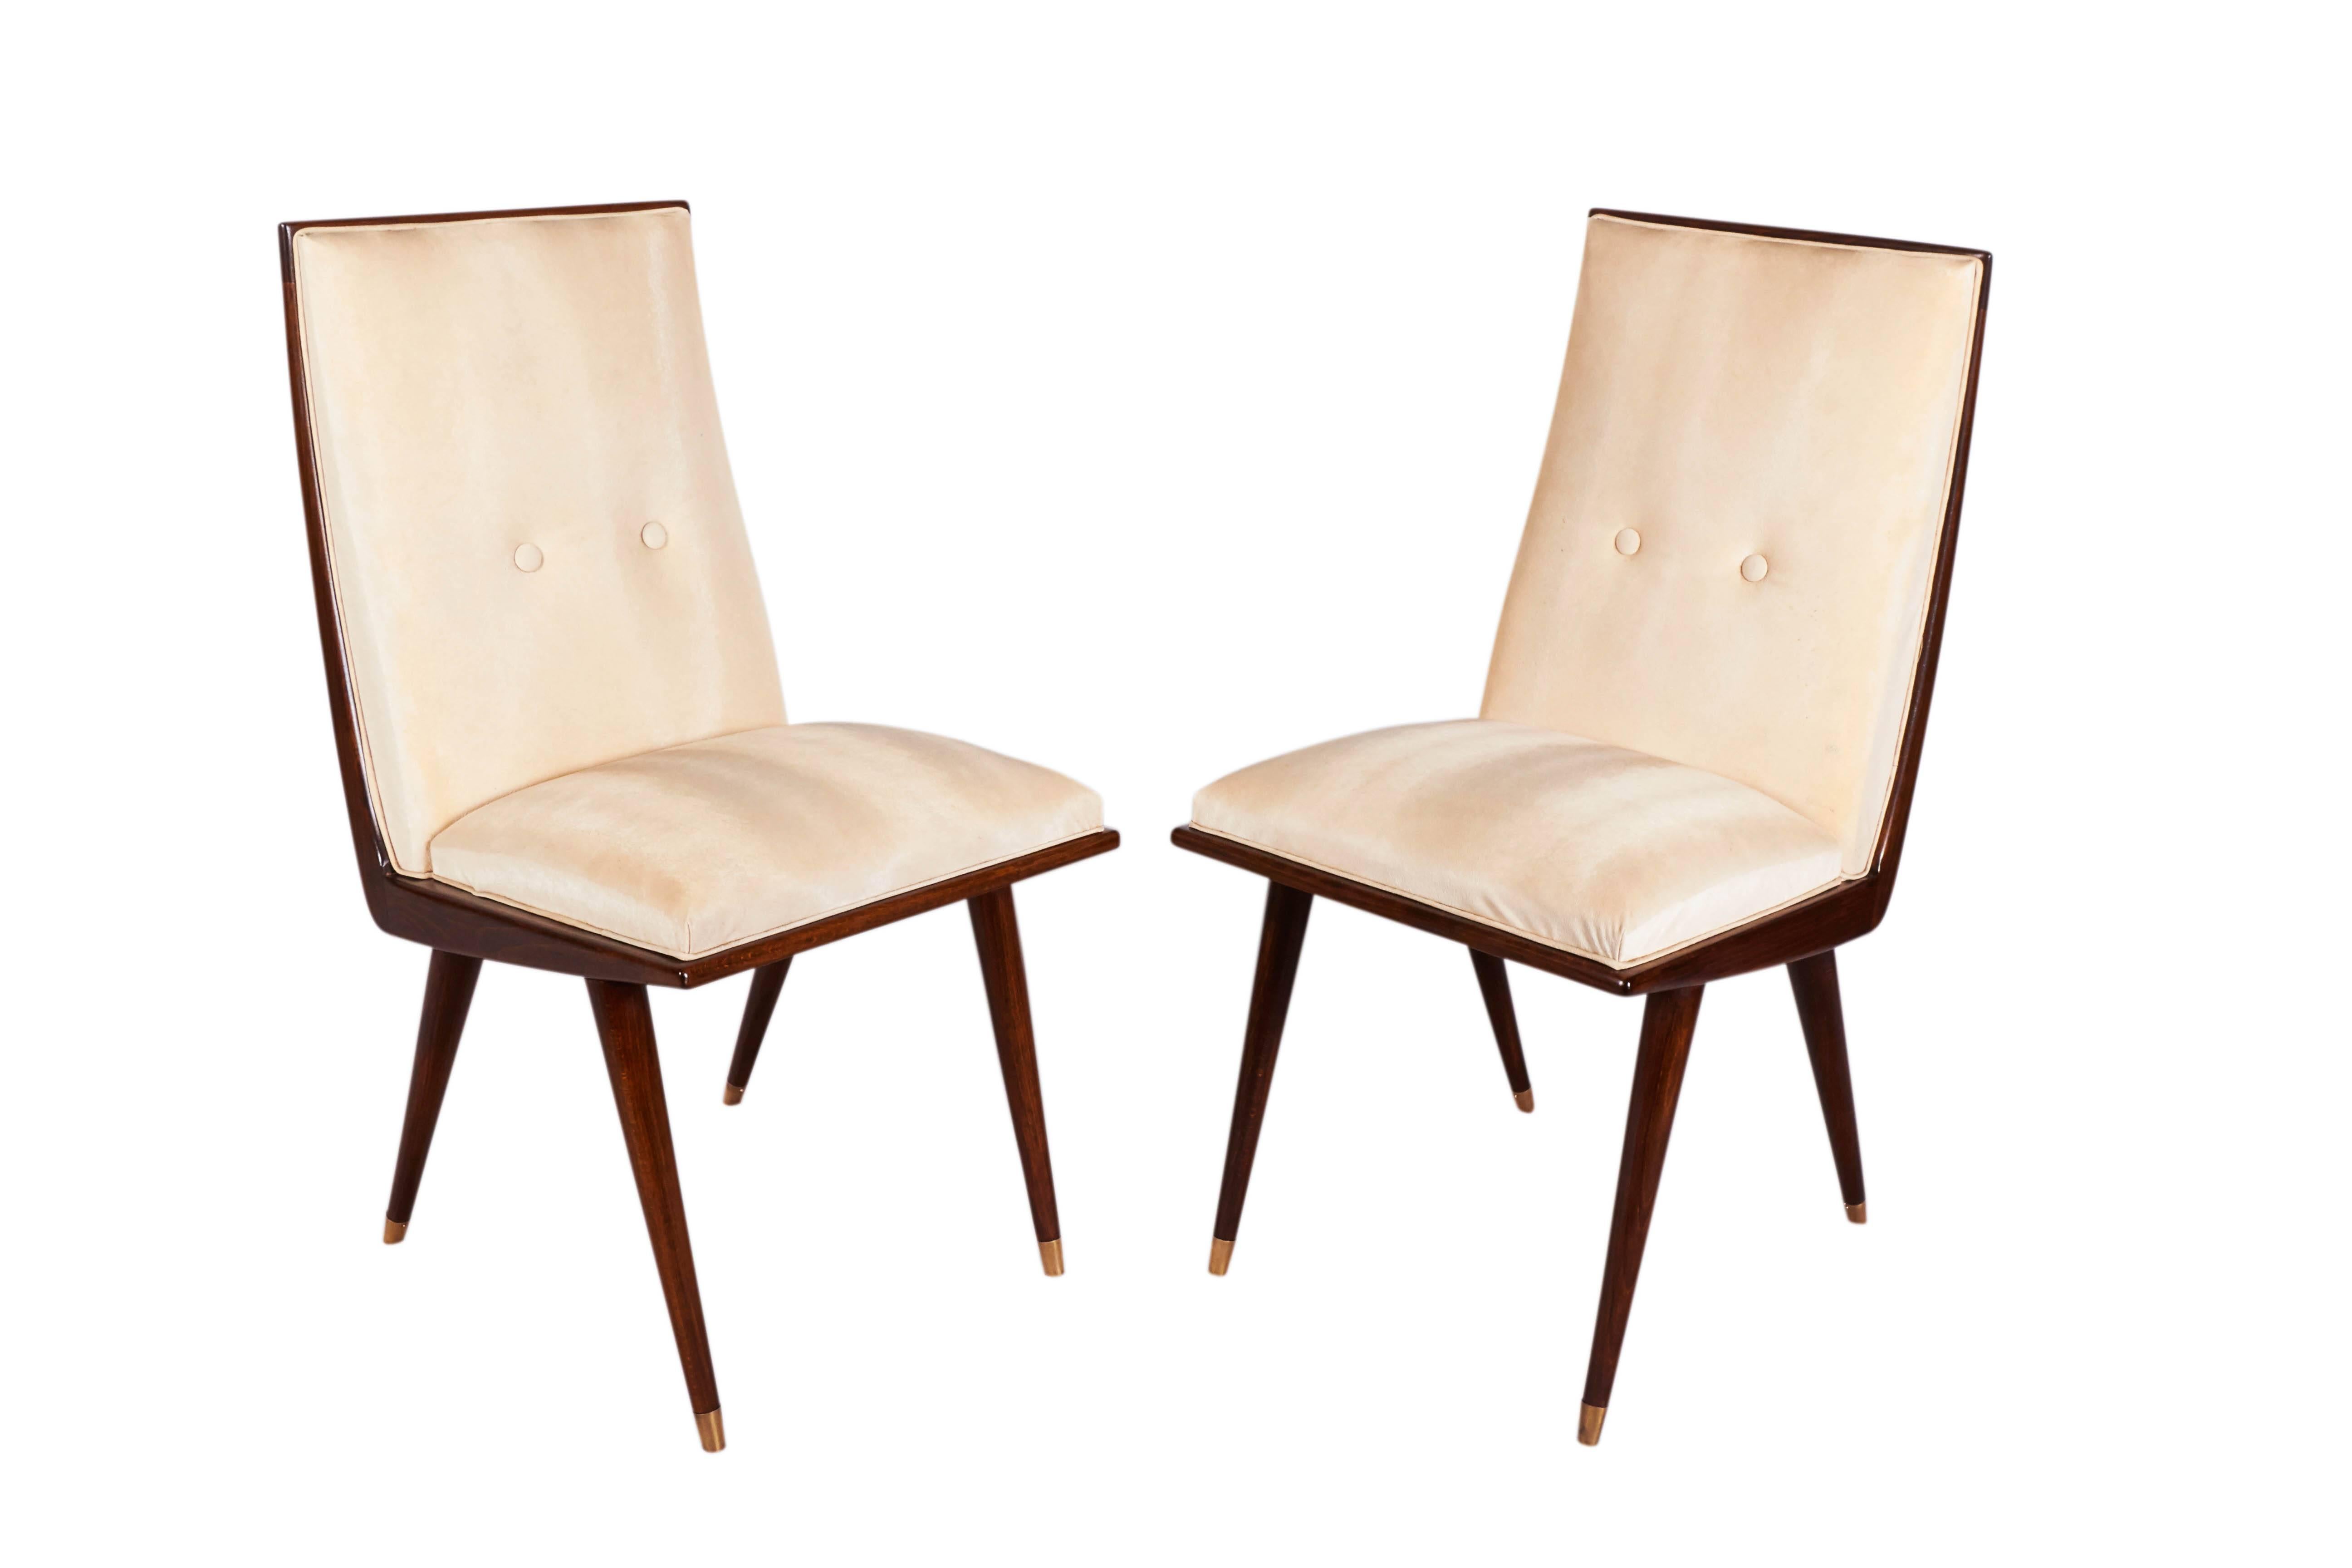 A set of six French side chairs, produced in the Mid-Century Modern era circa 1950s, seats and backs upholstered in original ivory toned leatherette, against deep stained wood frames, raised on tapered legs with brass sabot feet. Very good vintage